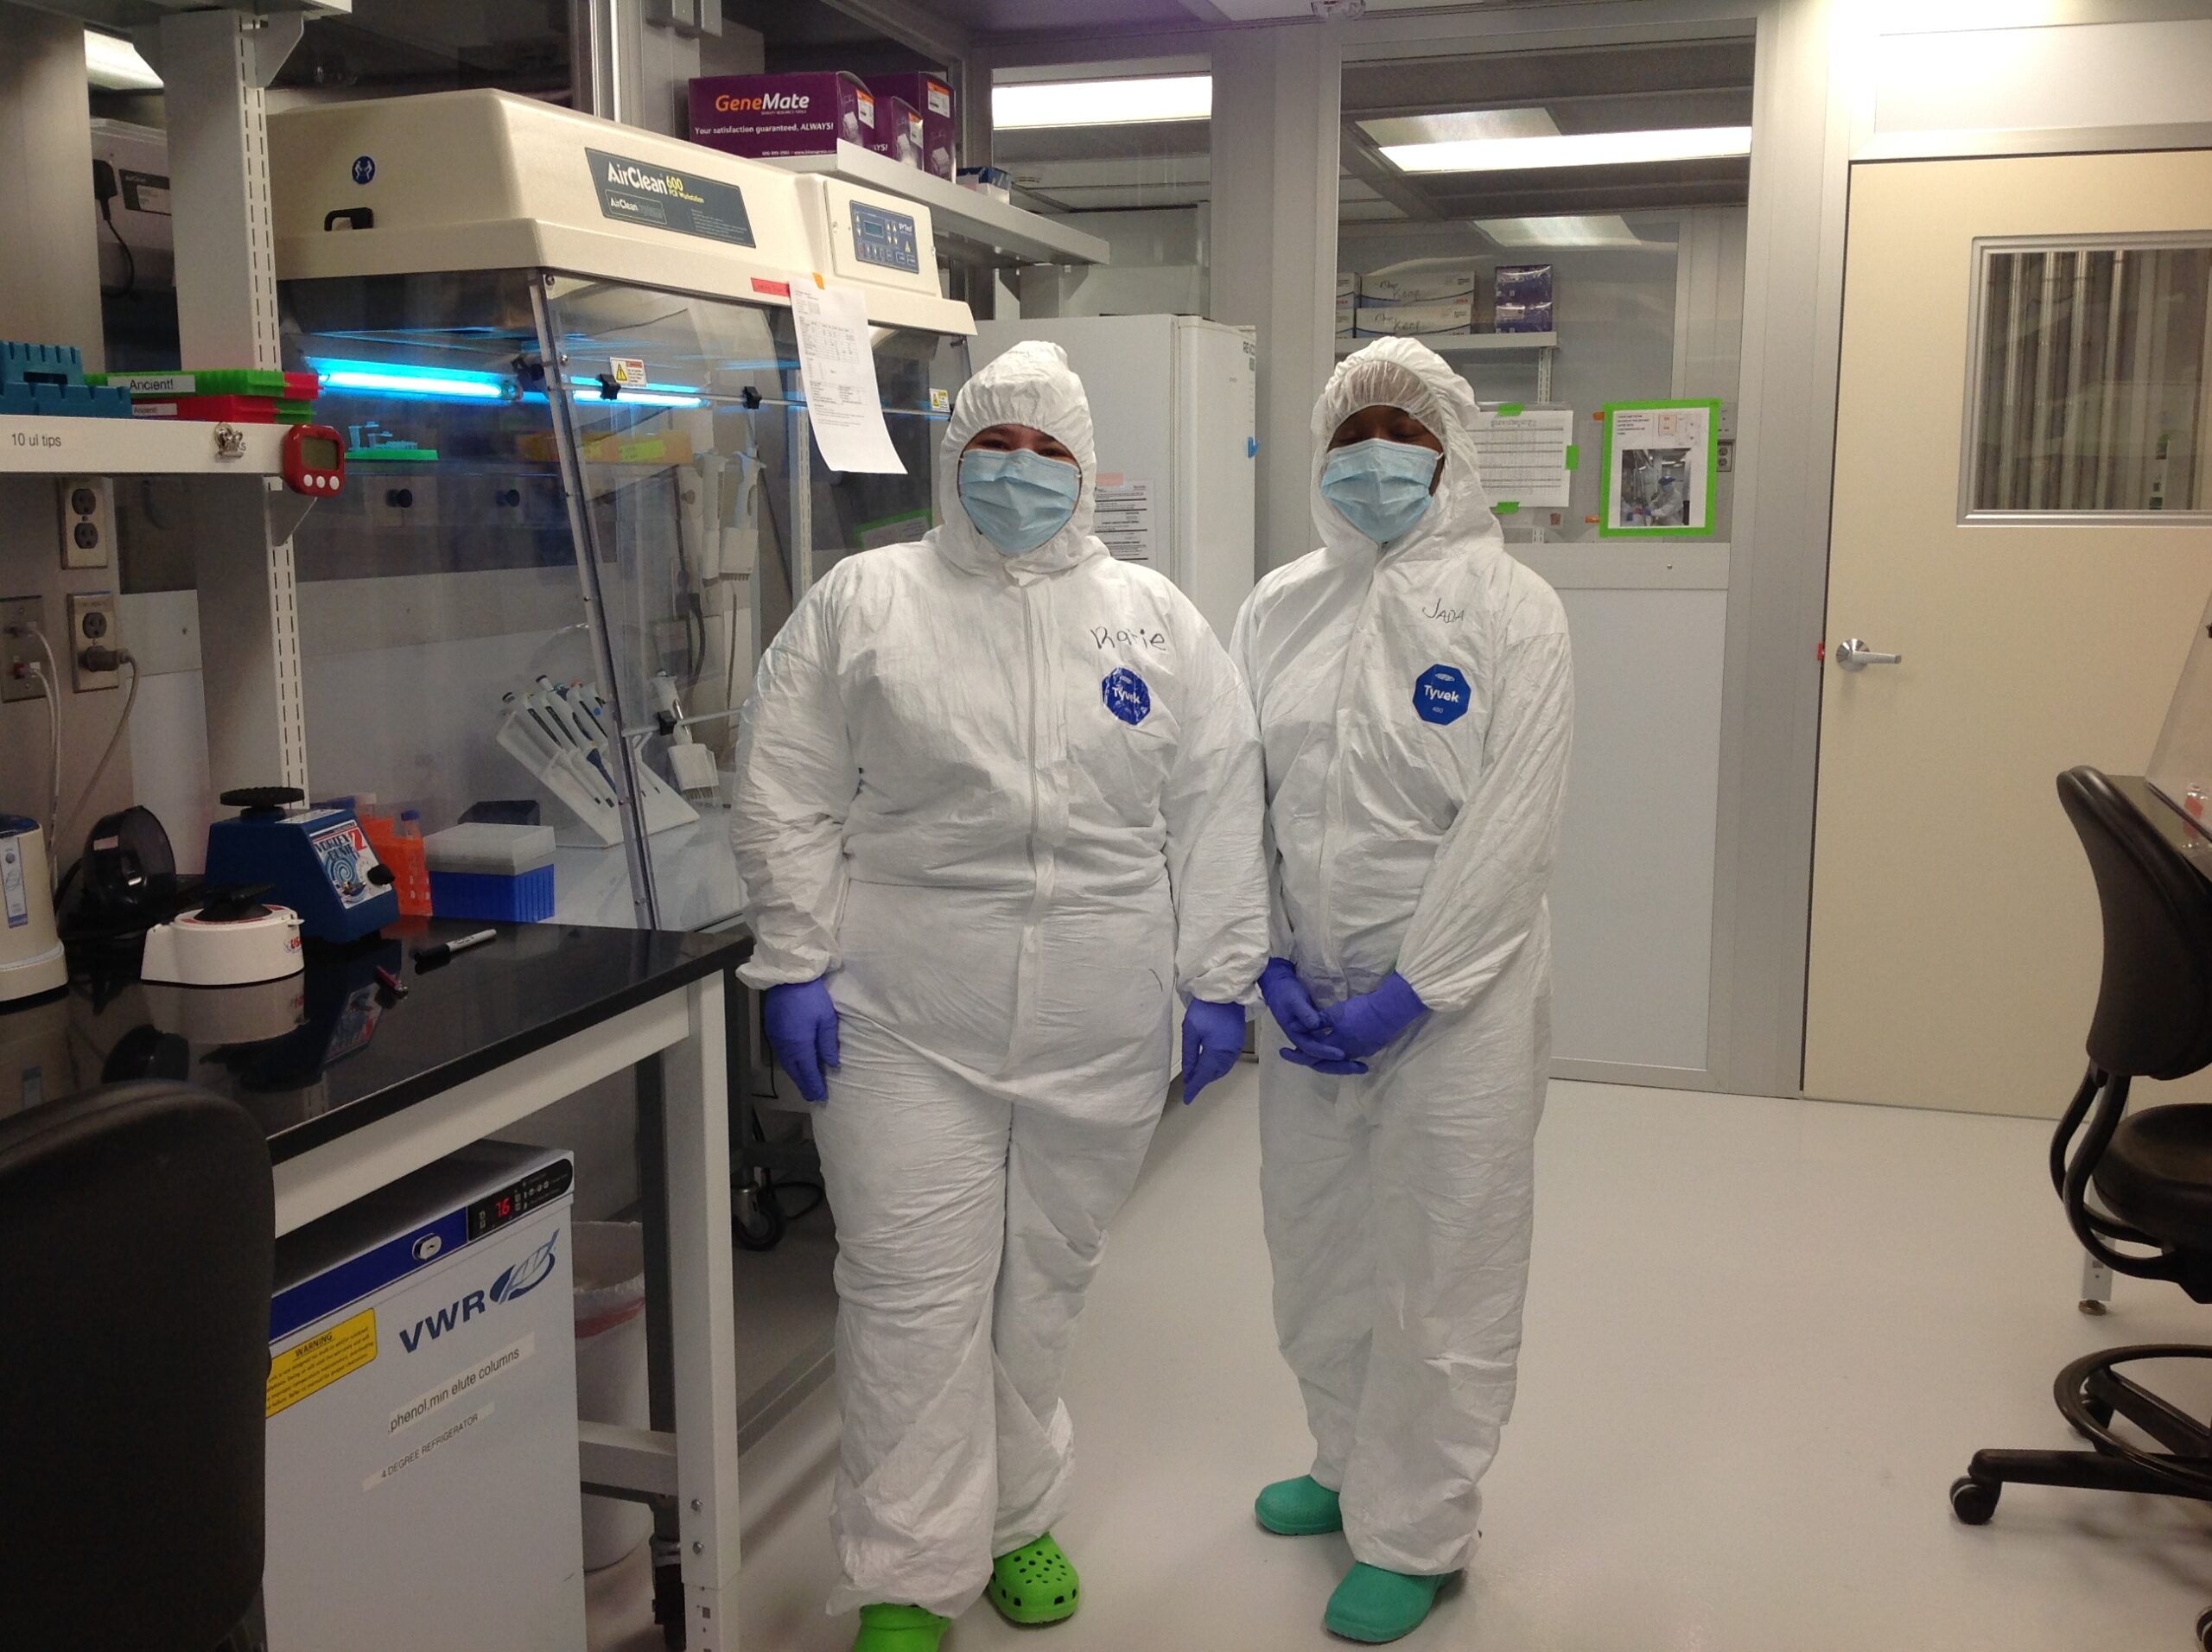 "Two scientists wearing full-body protective suits, gloves, masks, and hair coverings, standing in a laboratory. One has 'Katie' written on their suit and is wearing green Crocs, while the other has 'Jada' written on their suit and is wearing green shoe covers. They are standing next to laboratory equipment, including a fume hood labeled 'AirClean 600' and various lab supplies." alt text generated by ChatGPT